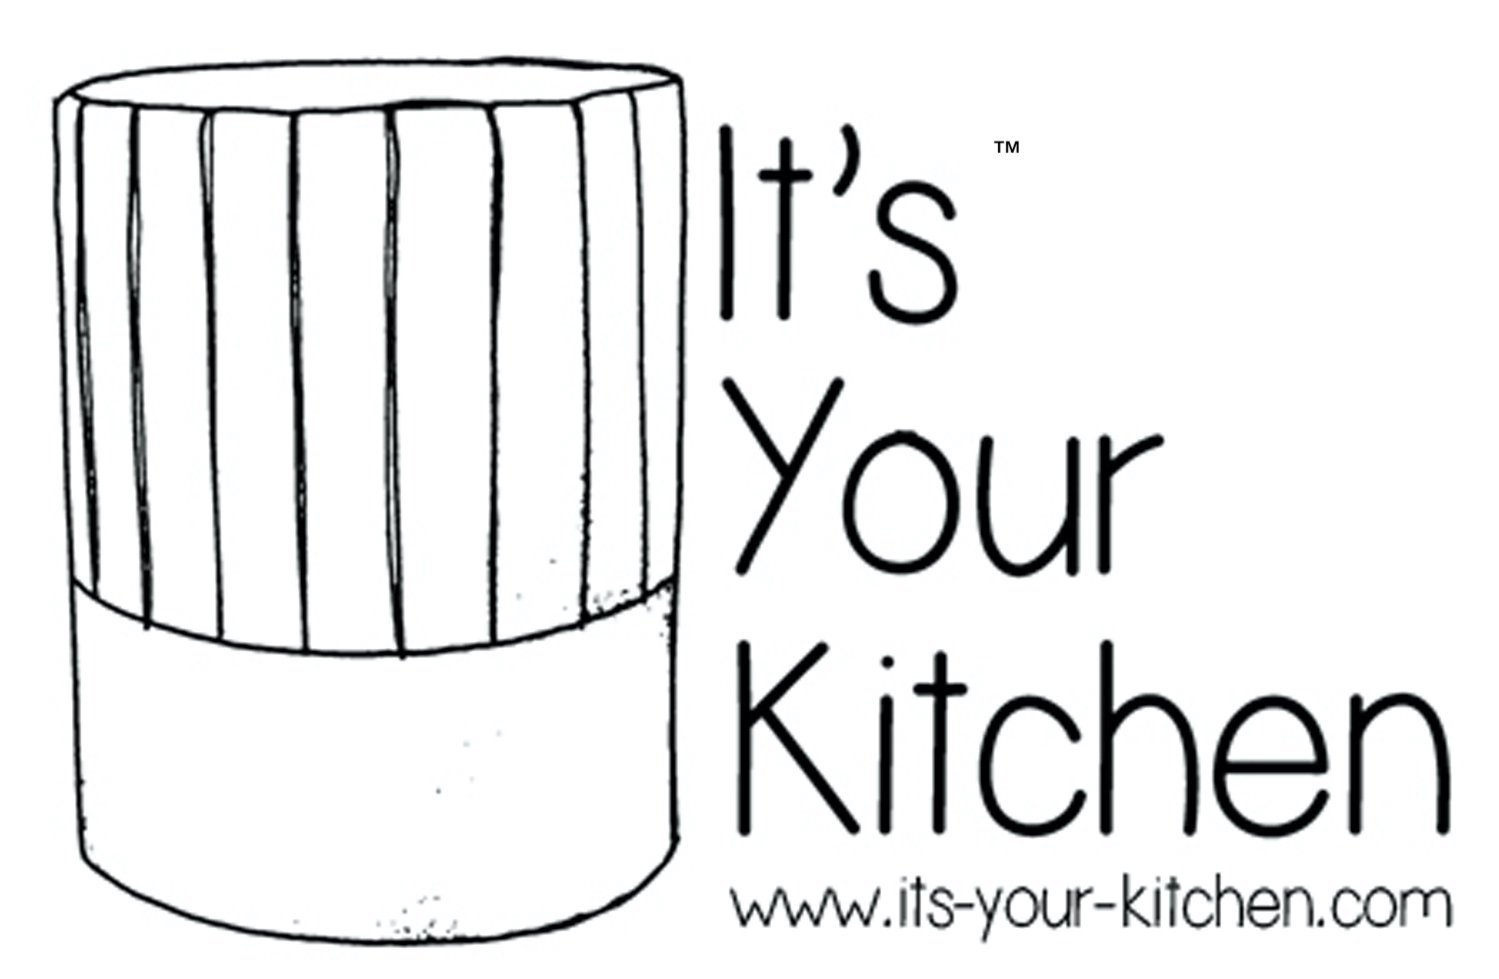 It's Your Kitchen™